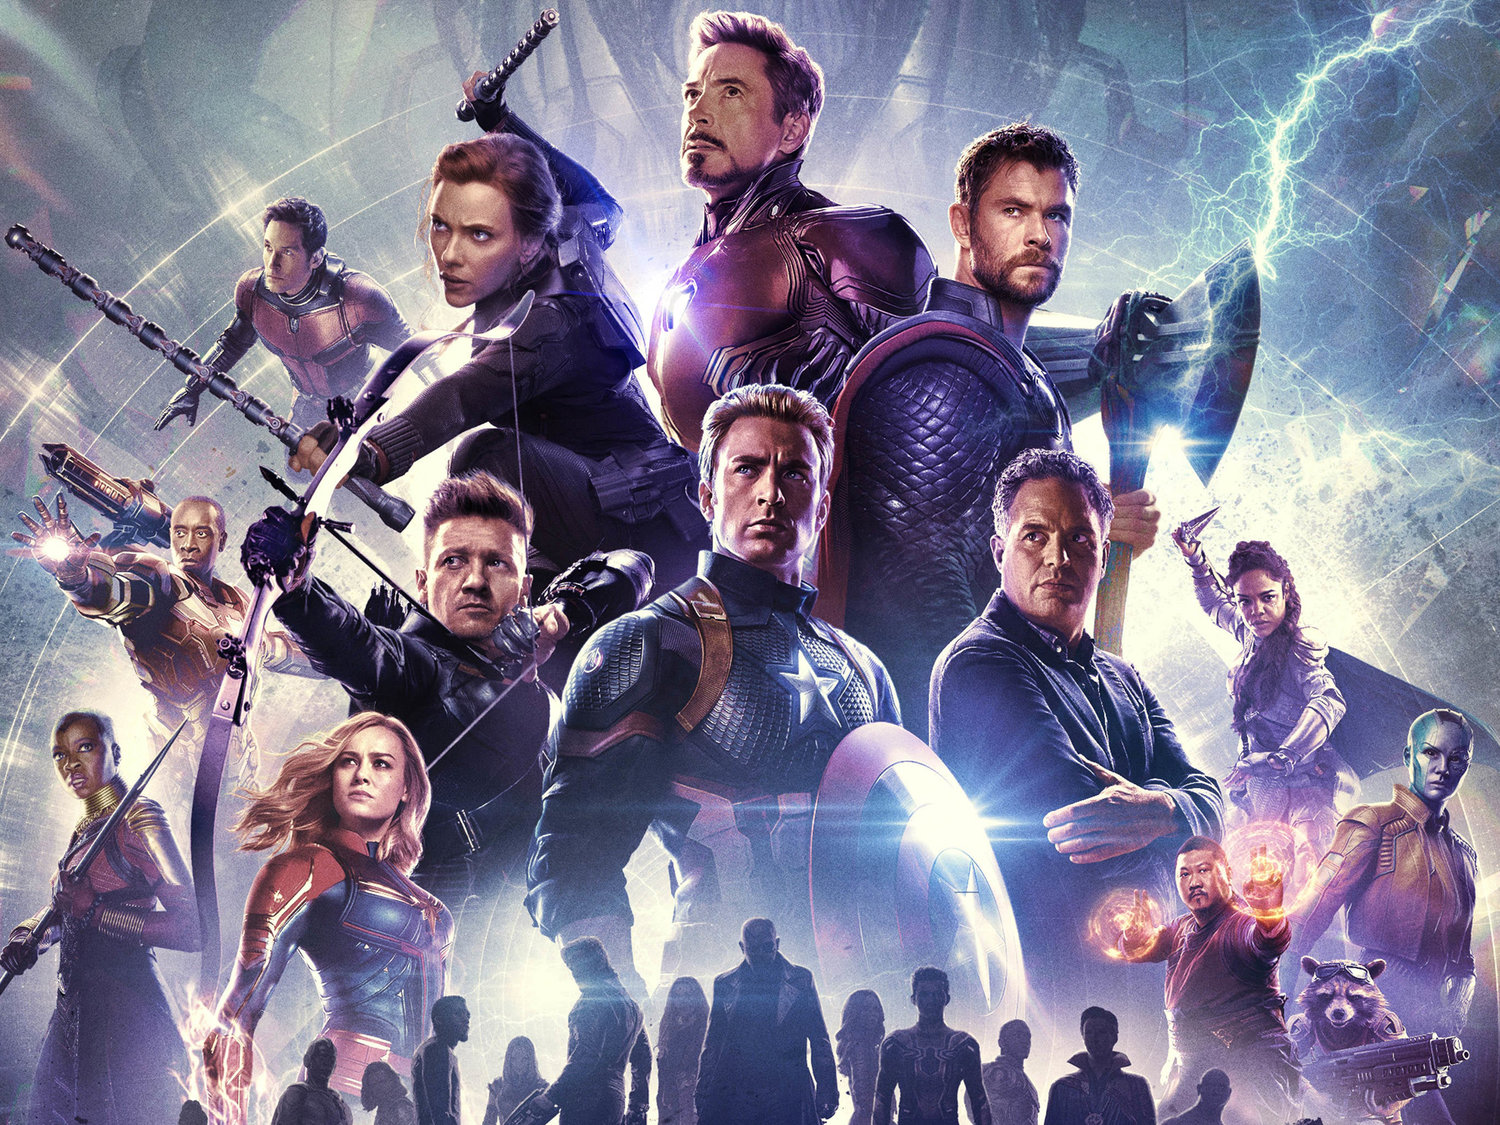 Top 999+ avengers endgame images – Amazing Collection avengers endgame images Full 4K